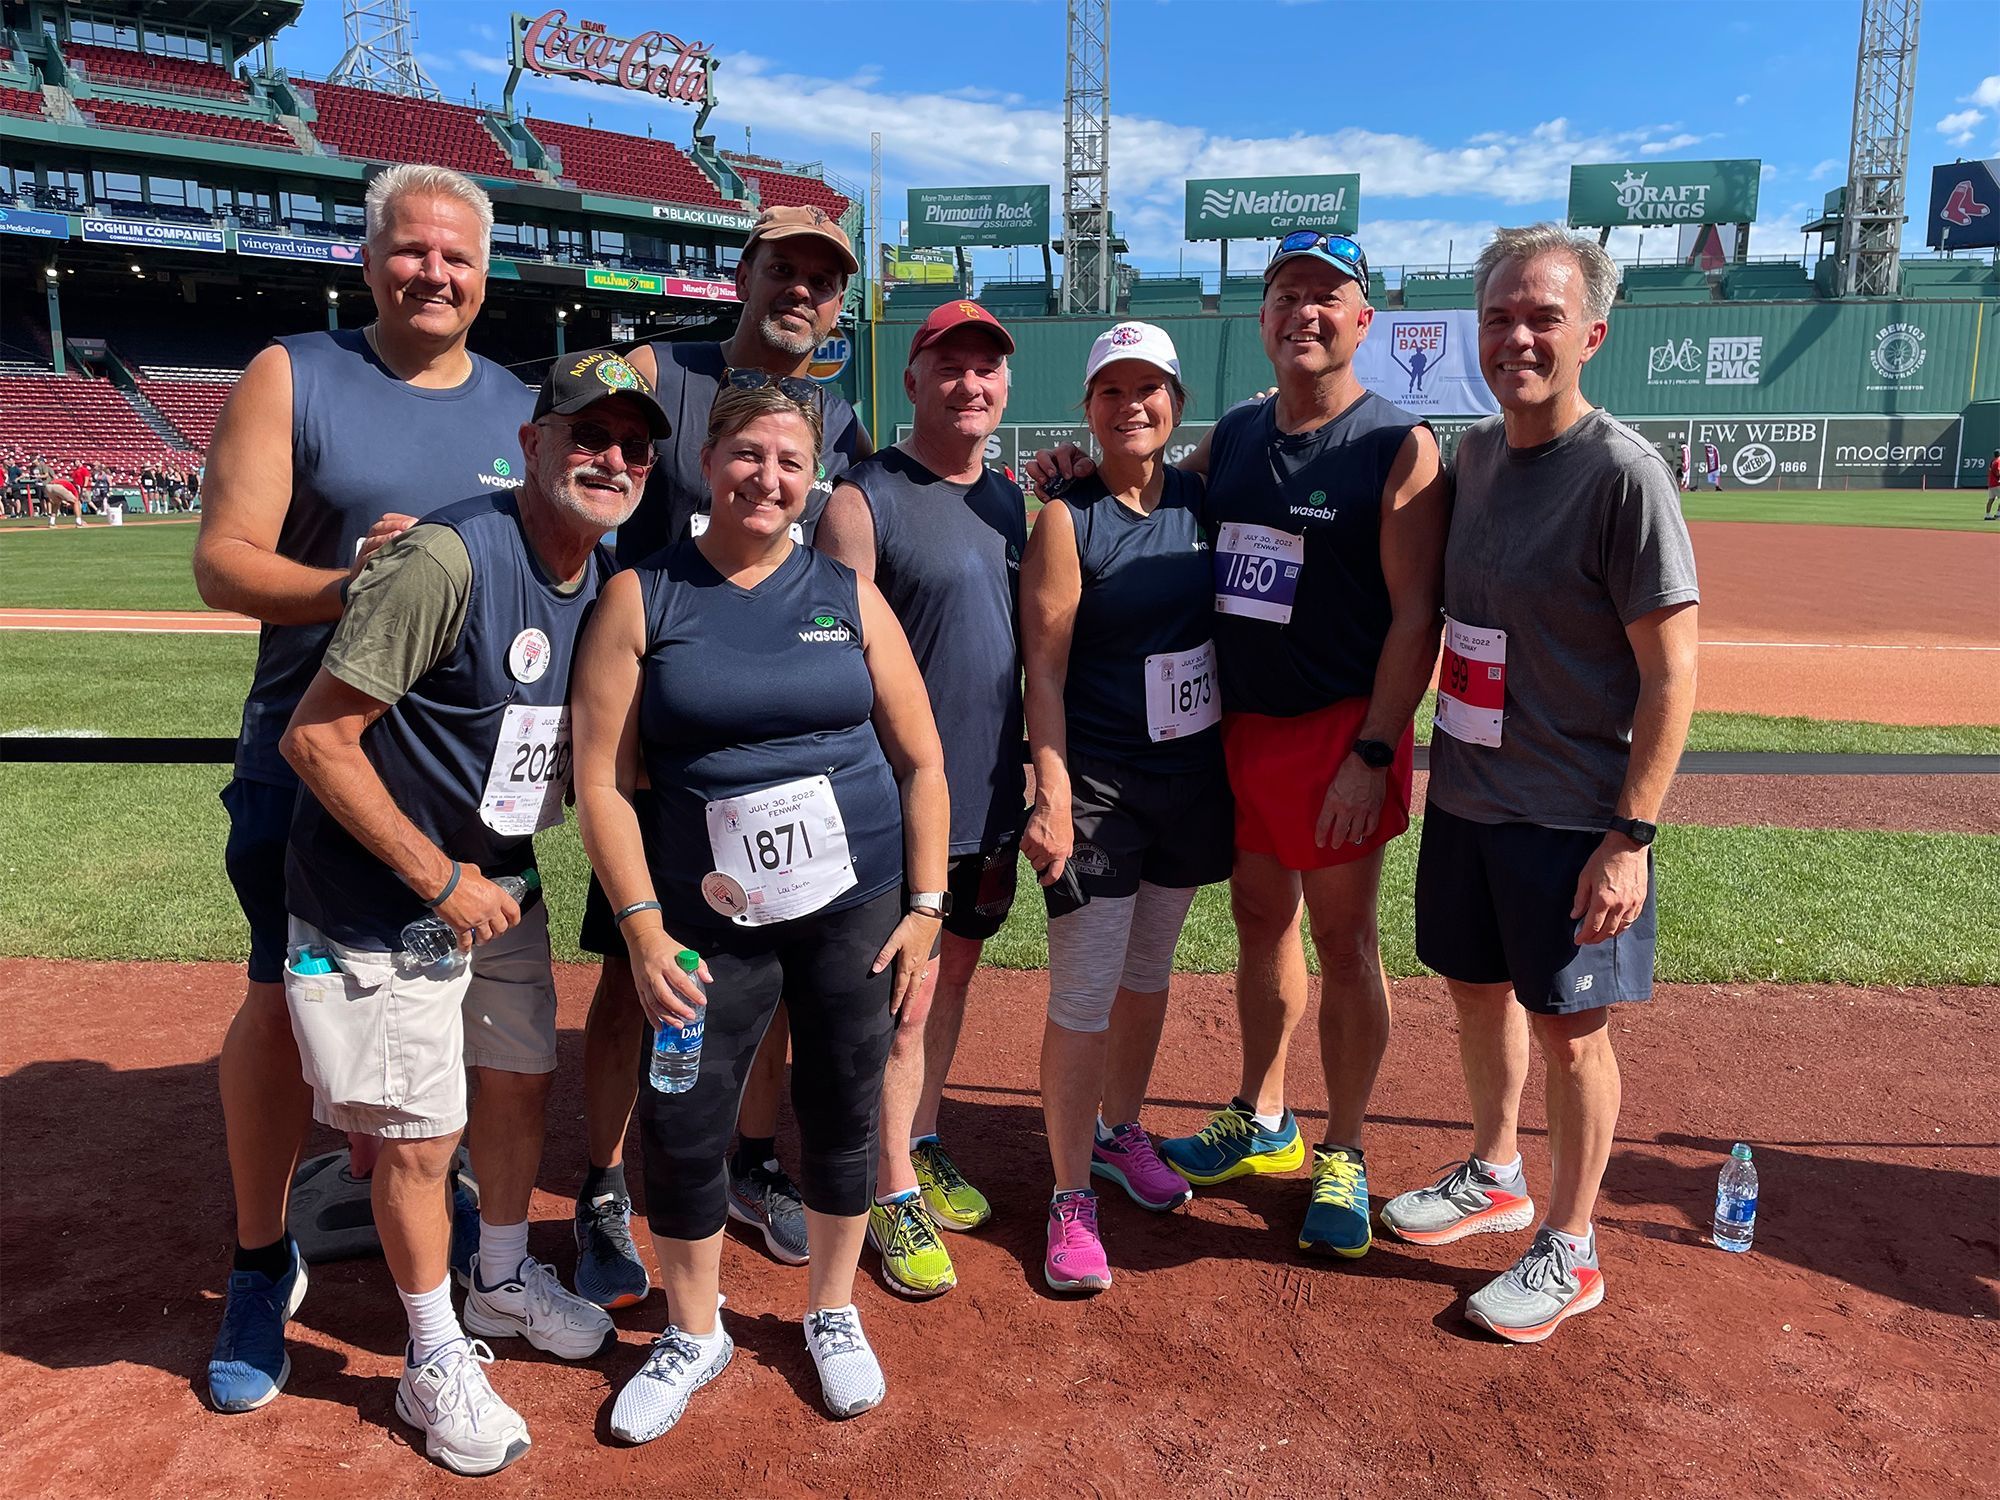  Group photo of Wasabi team members on the field at Fenway Park.